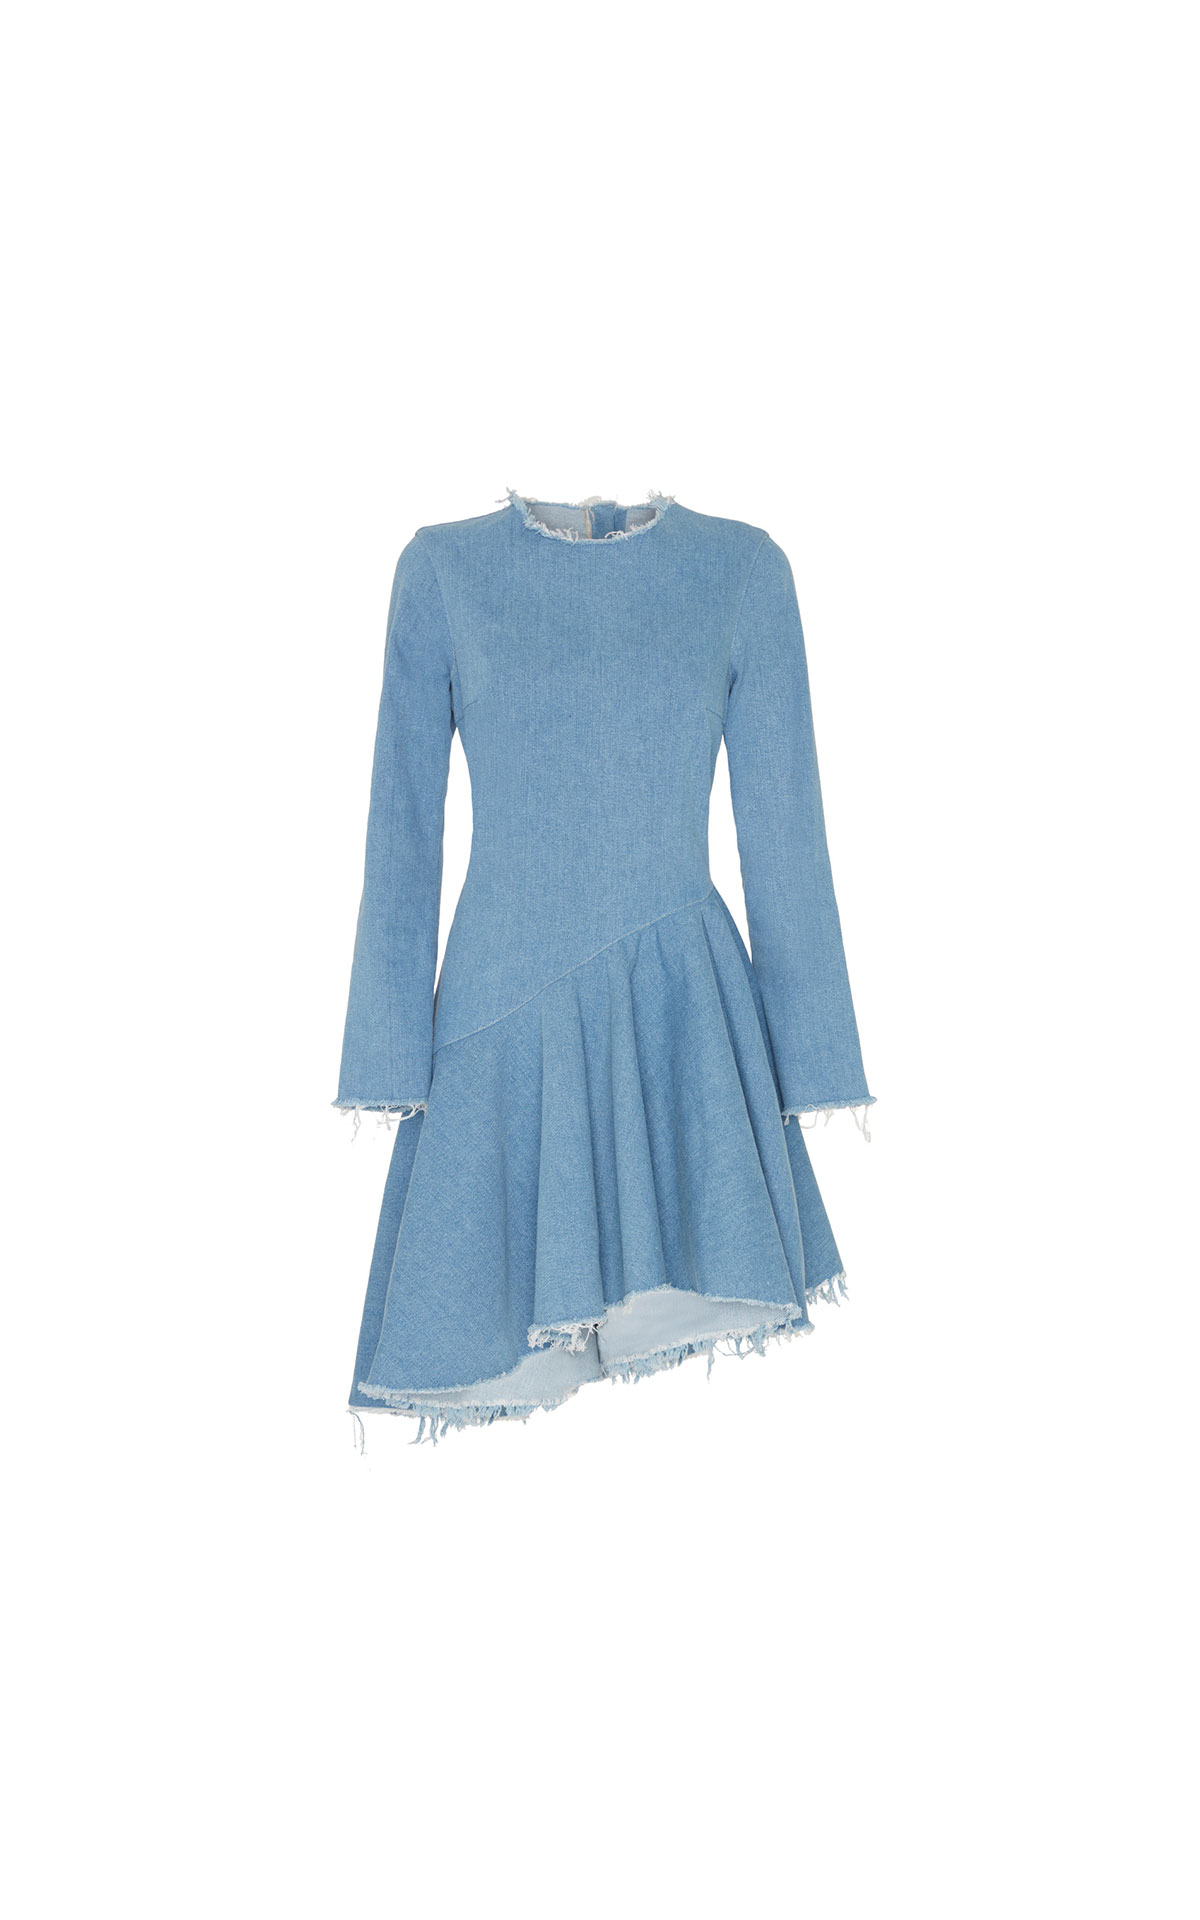 7 for all mankind Frayed dress light blue from Bicester Village